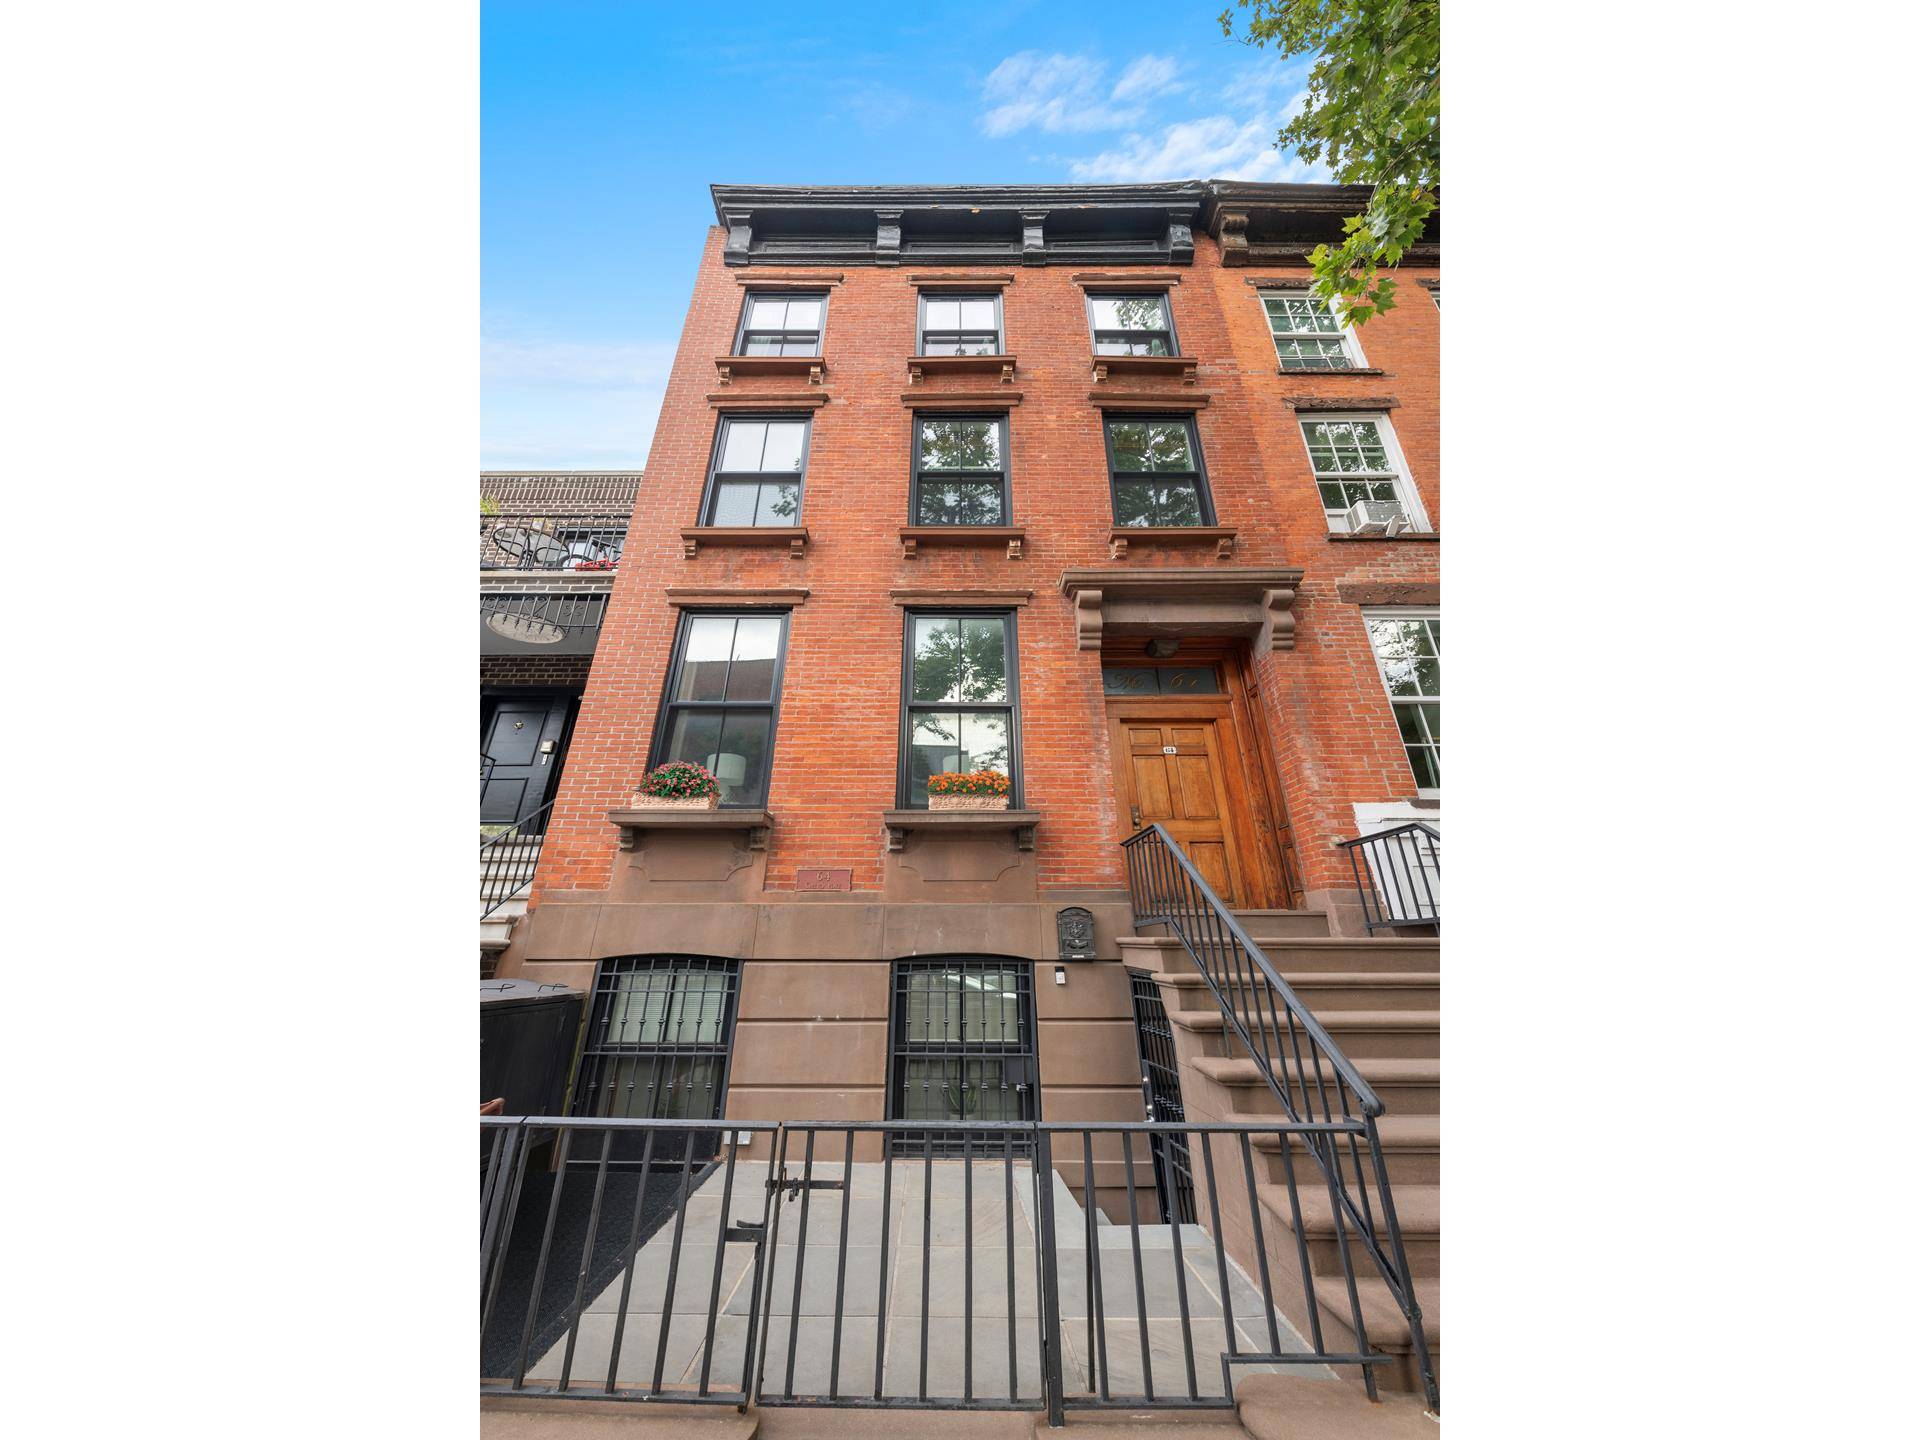 64 Cheever Place presents a rare opportunity to own a large historic townhouse on one of Cobble Hill's most coveted single street blocks.